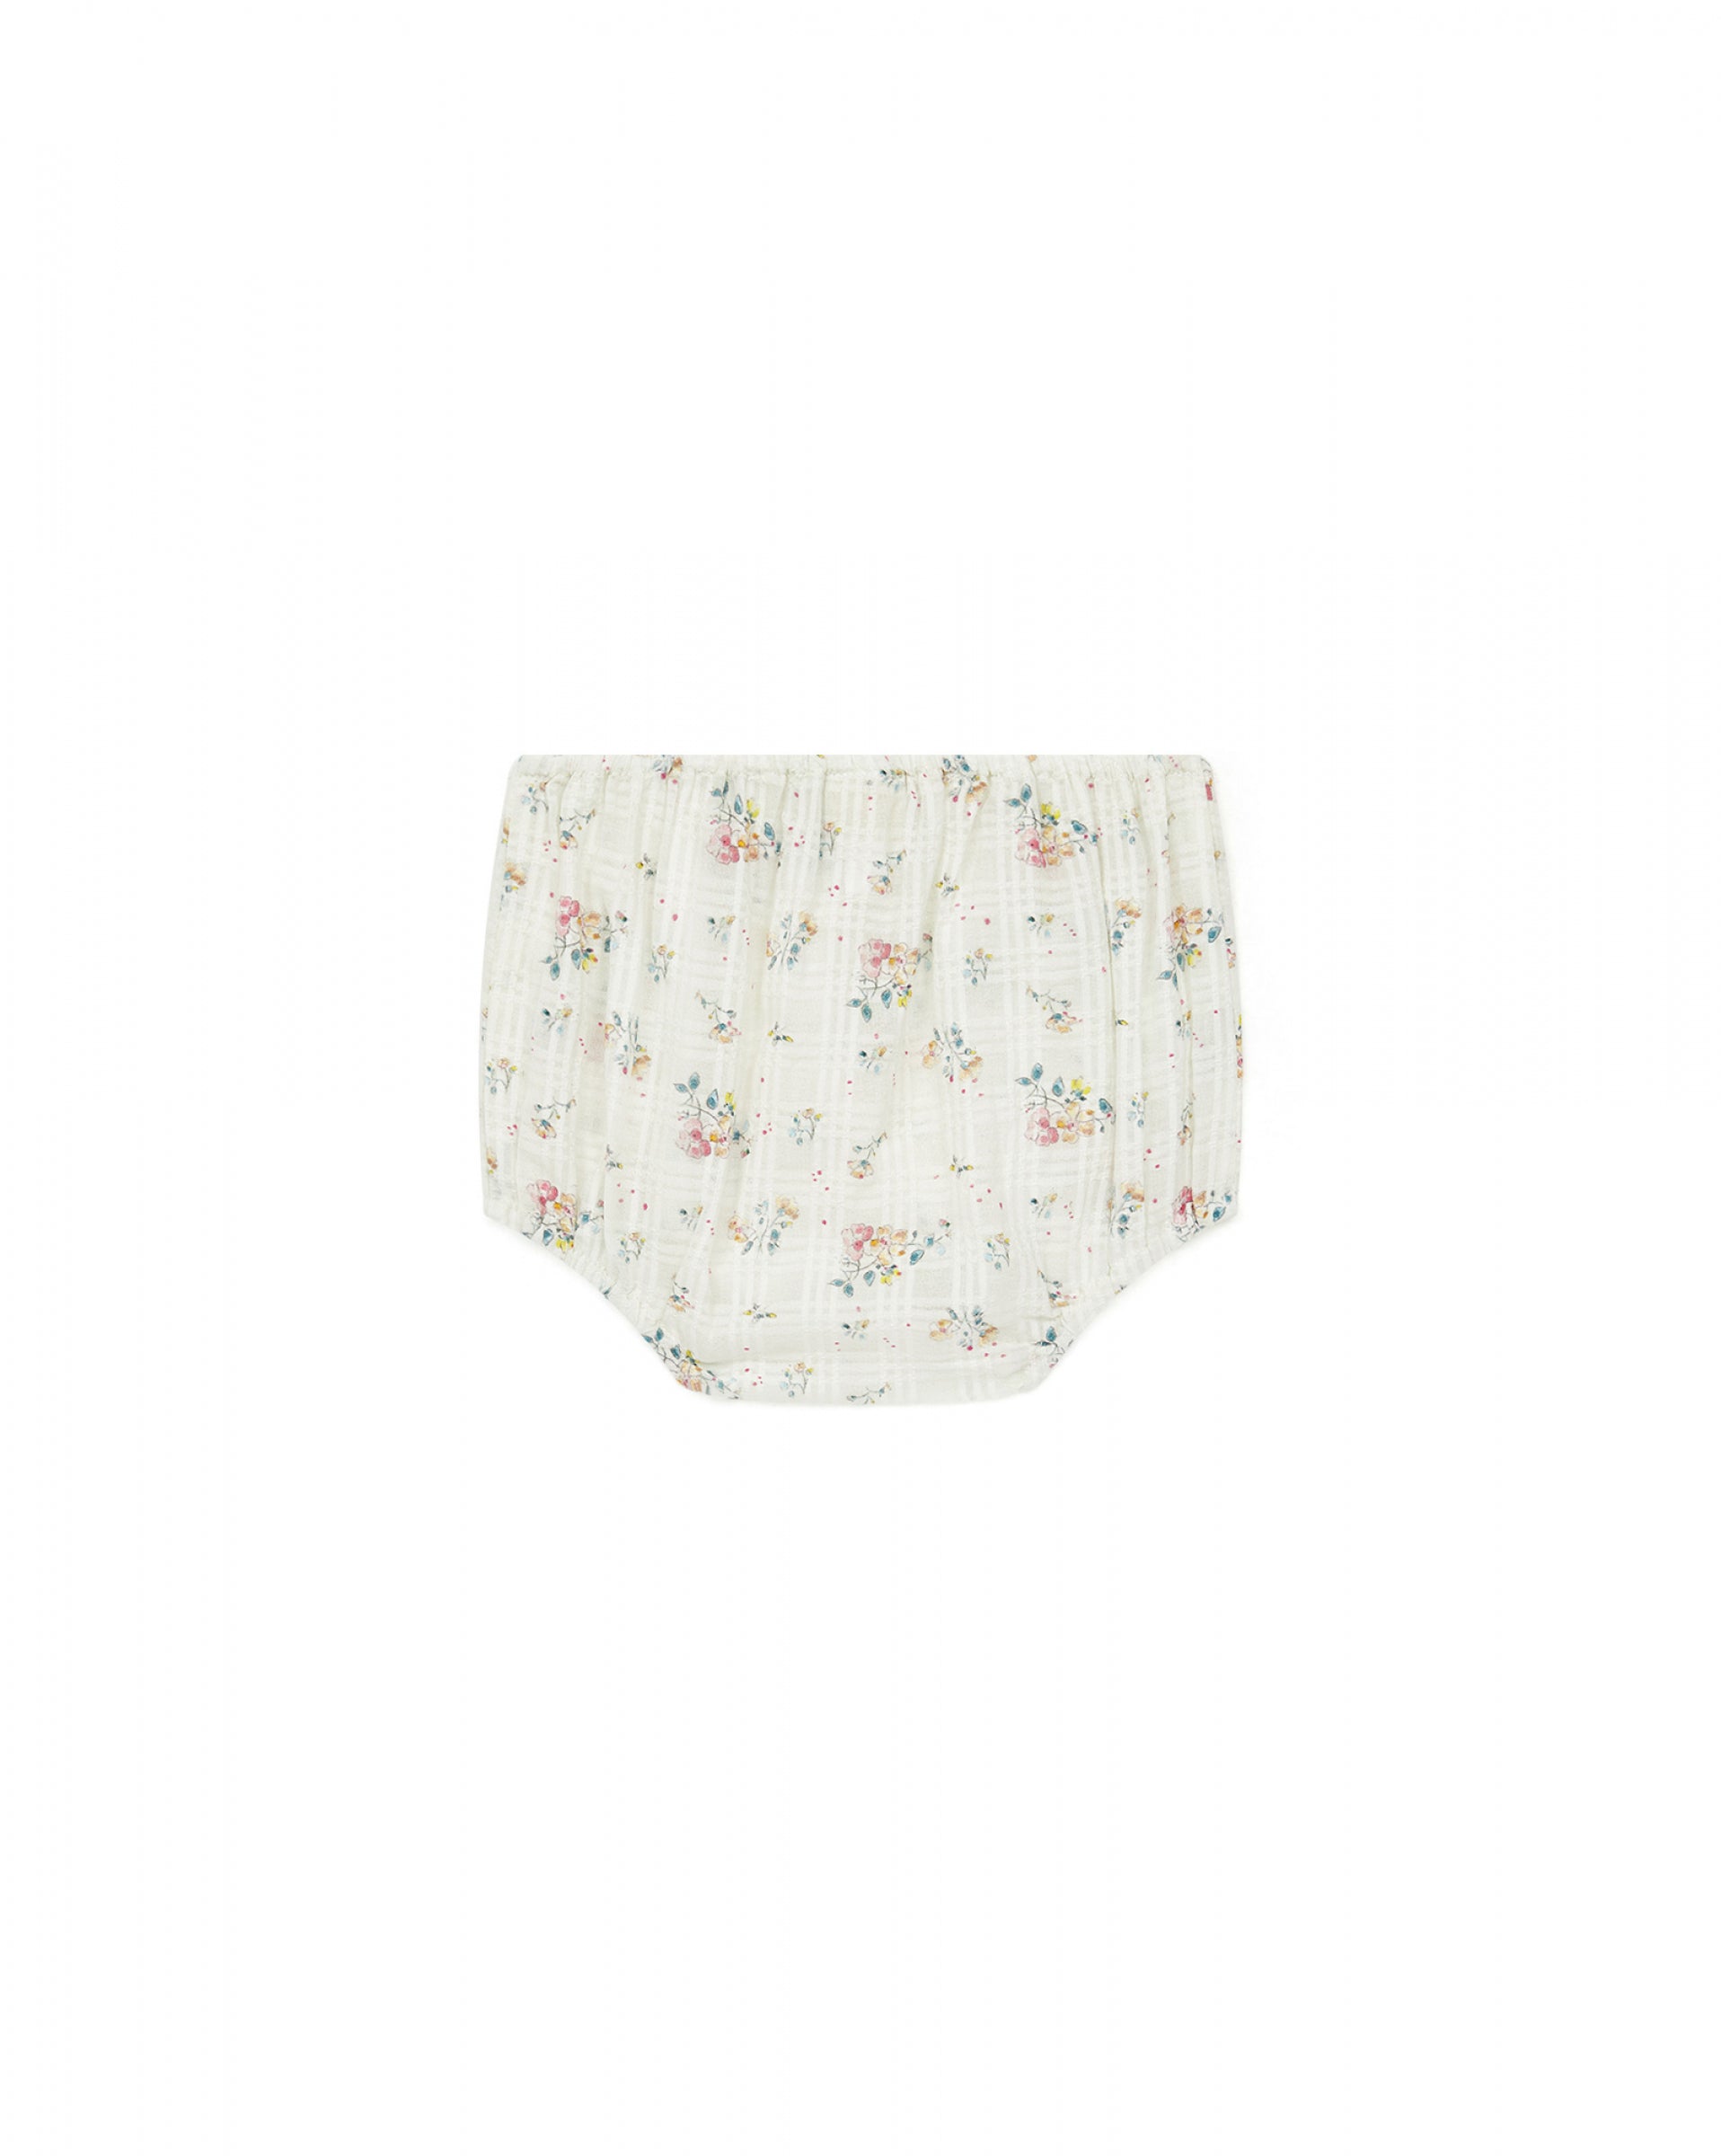 Baby Girls White Floral Bloomers